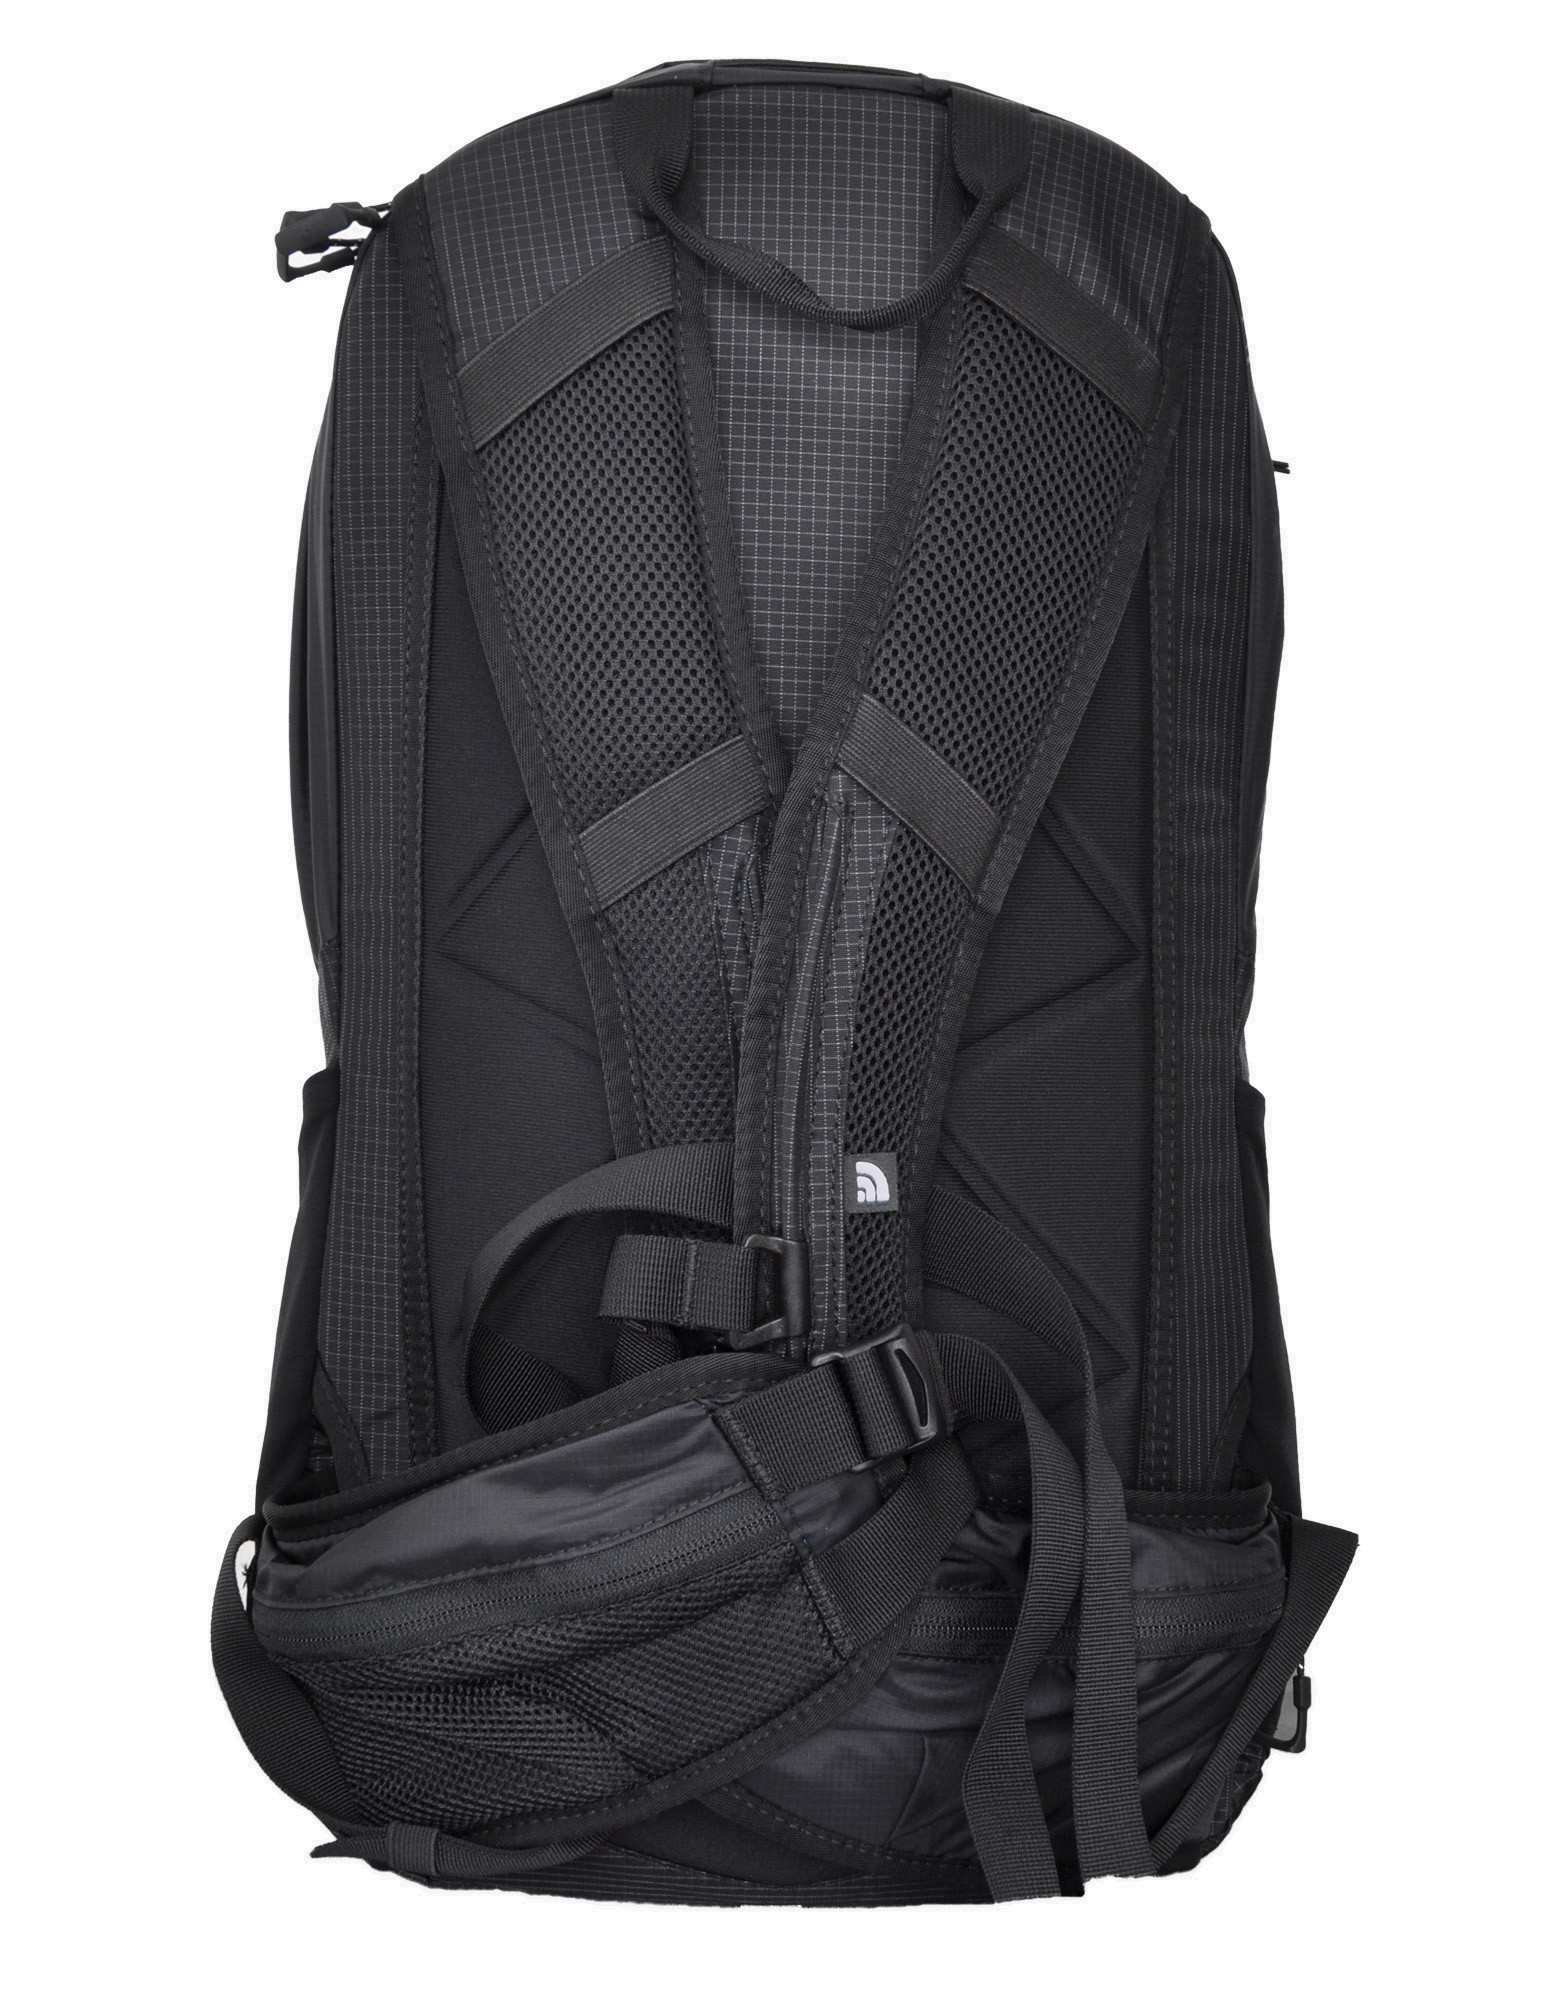 The North Face Sac à Dos Angstrom 20L